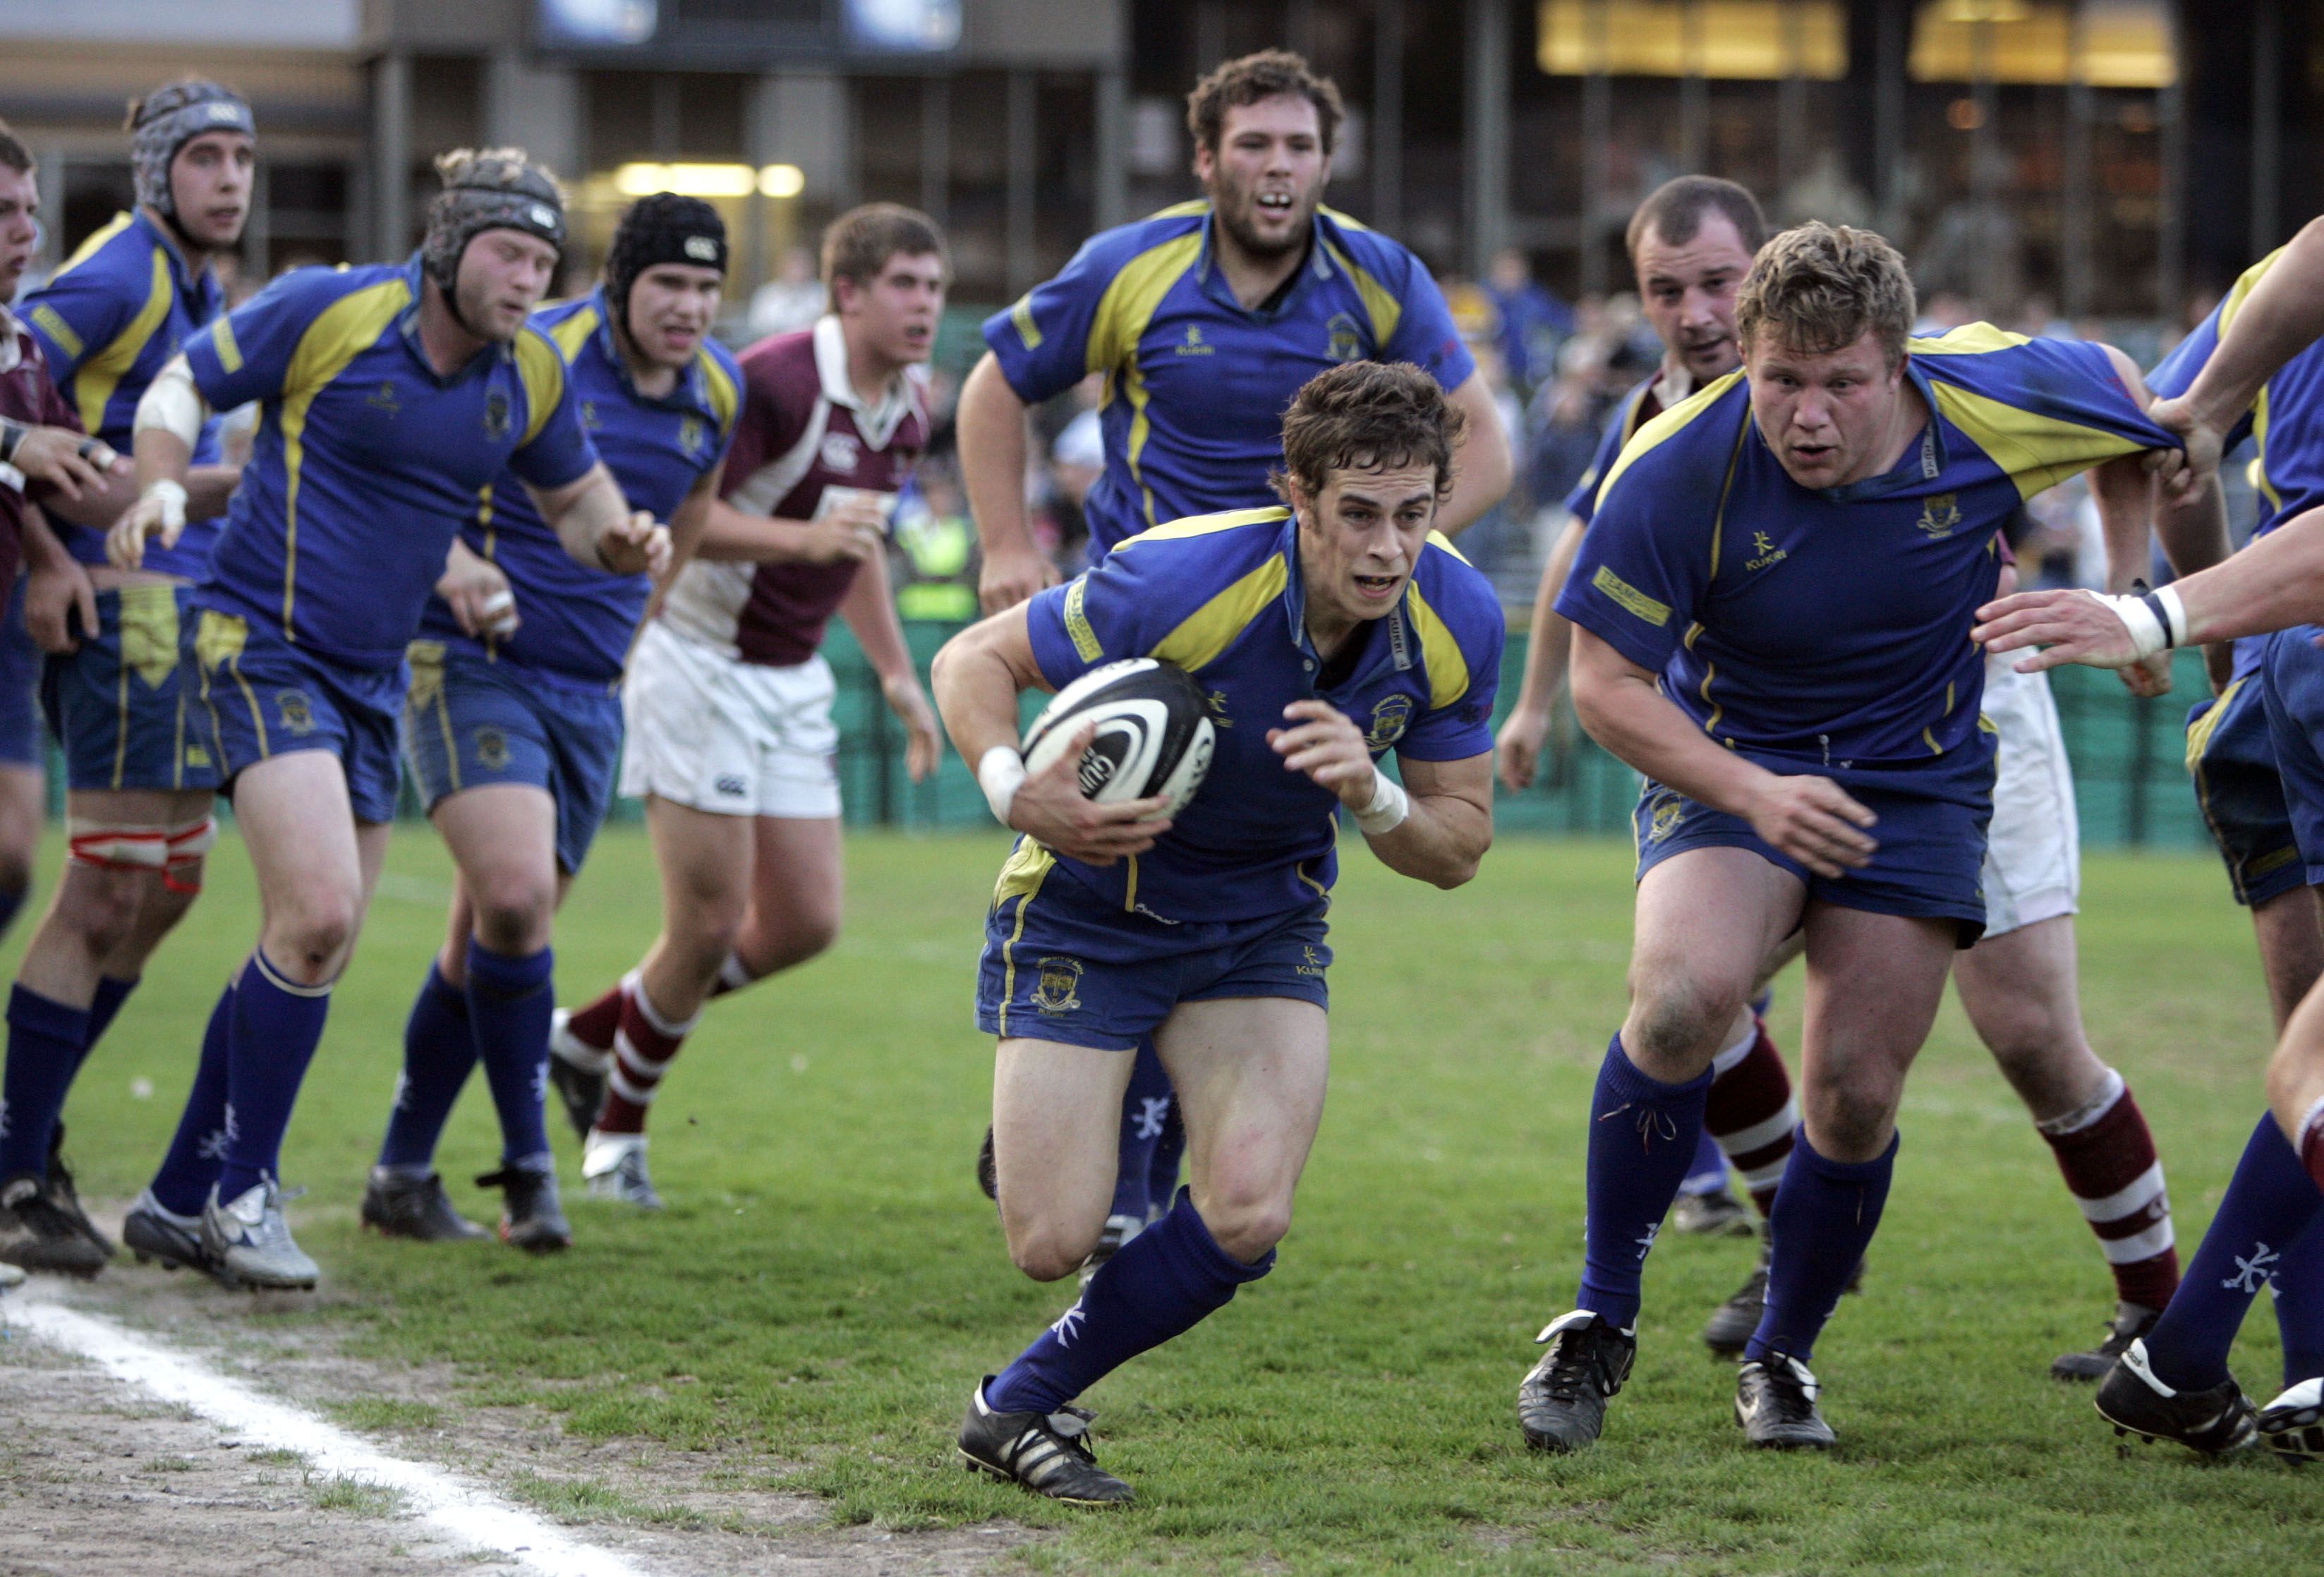 Rugby Sports HD Wallpaper very beautiful and much Interesting.Now